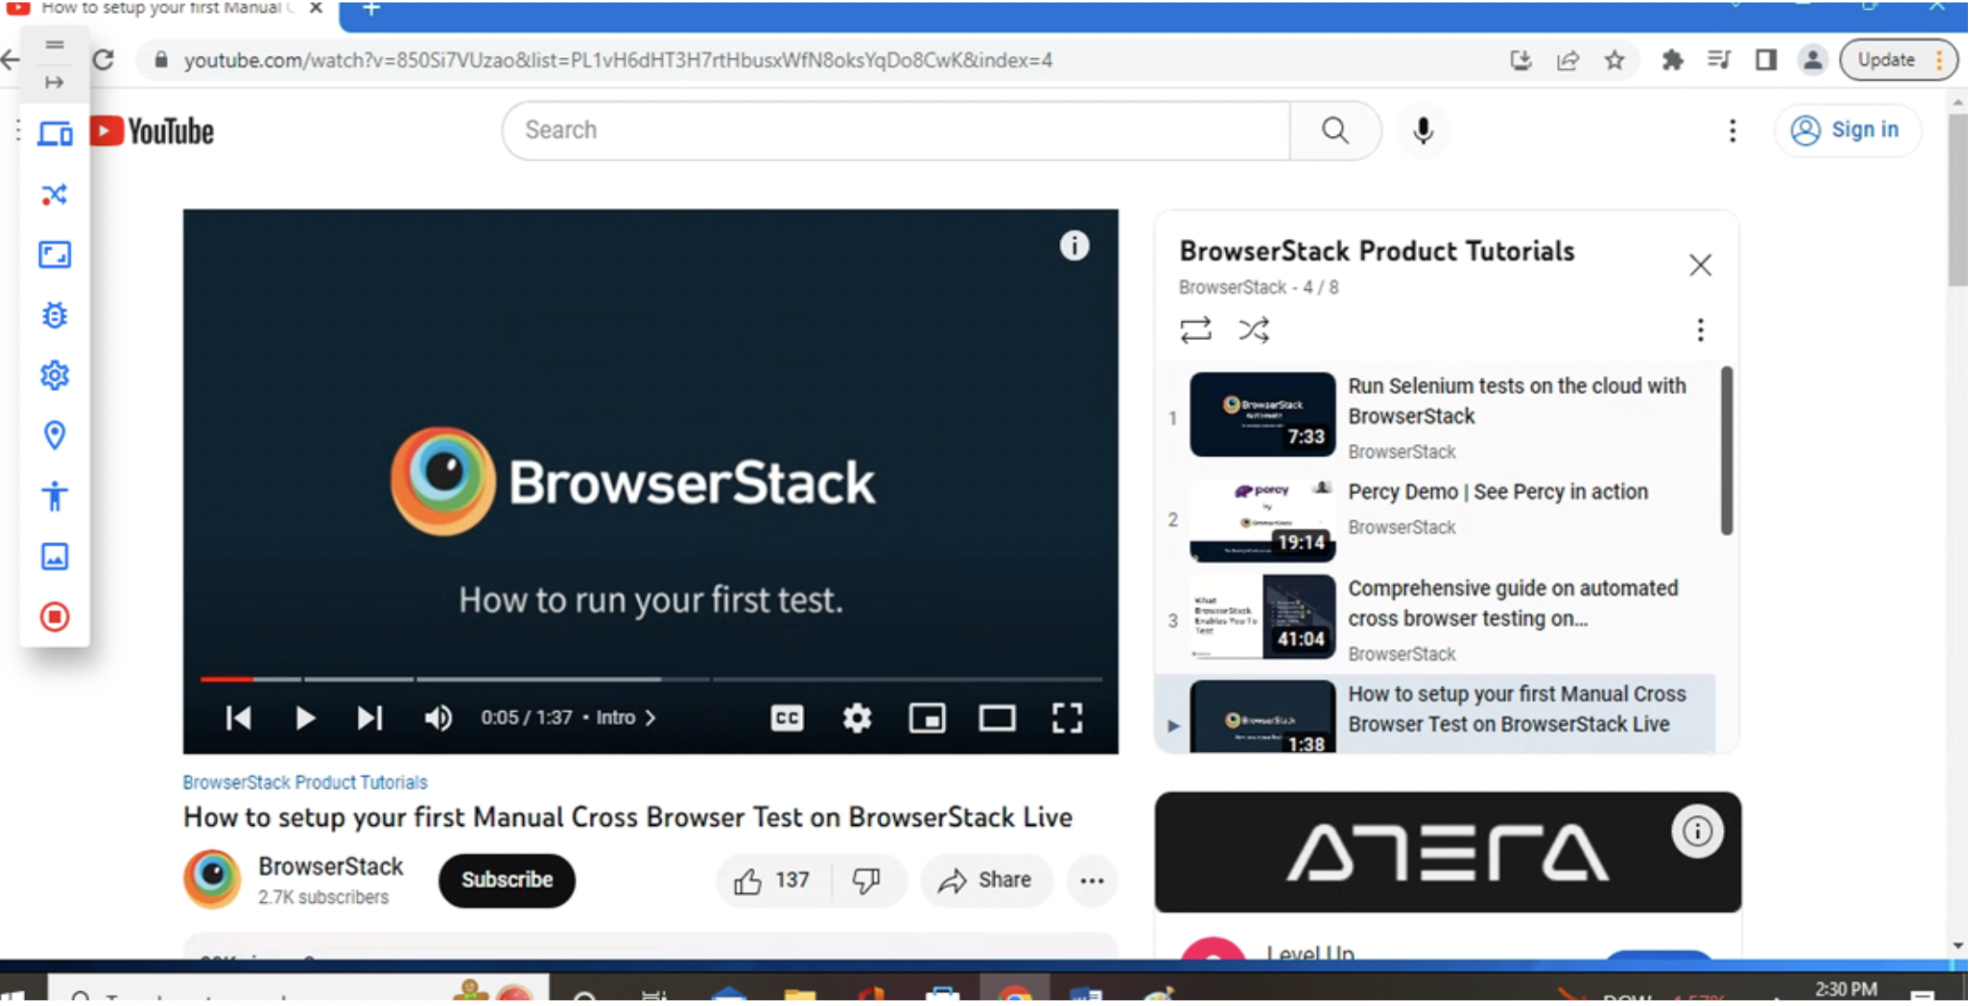 Video Testing on Windows11 Chrome107 browser using BrowserStack Live